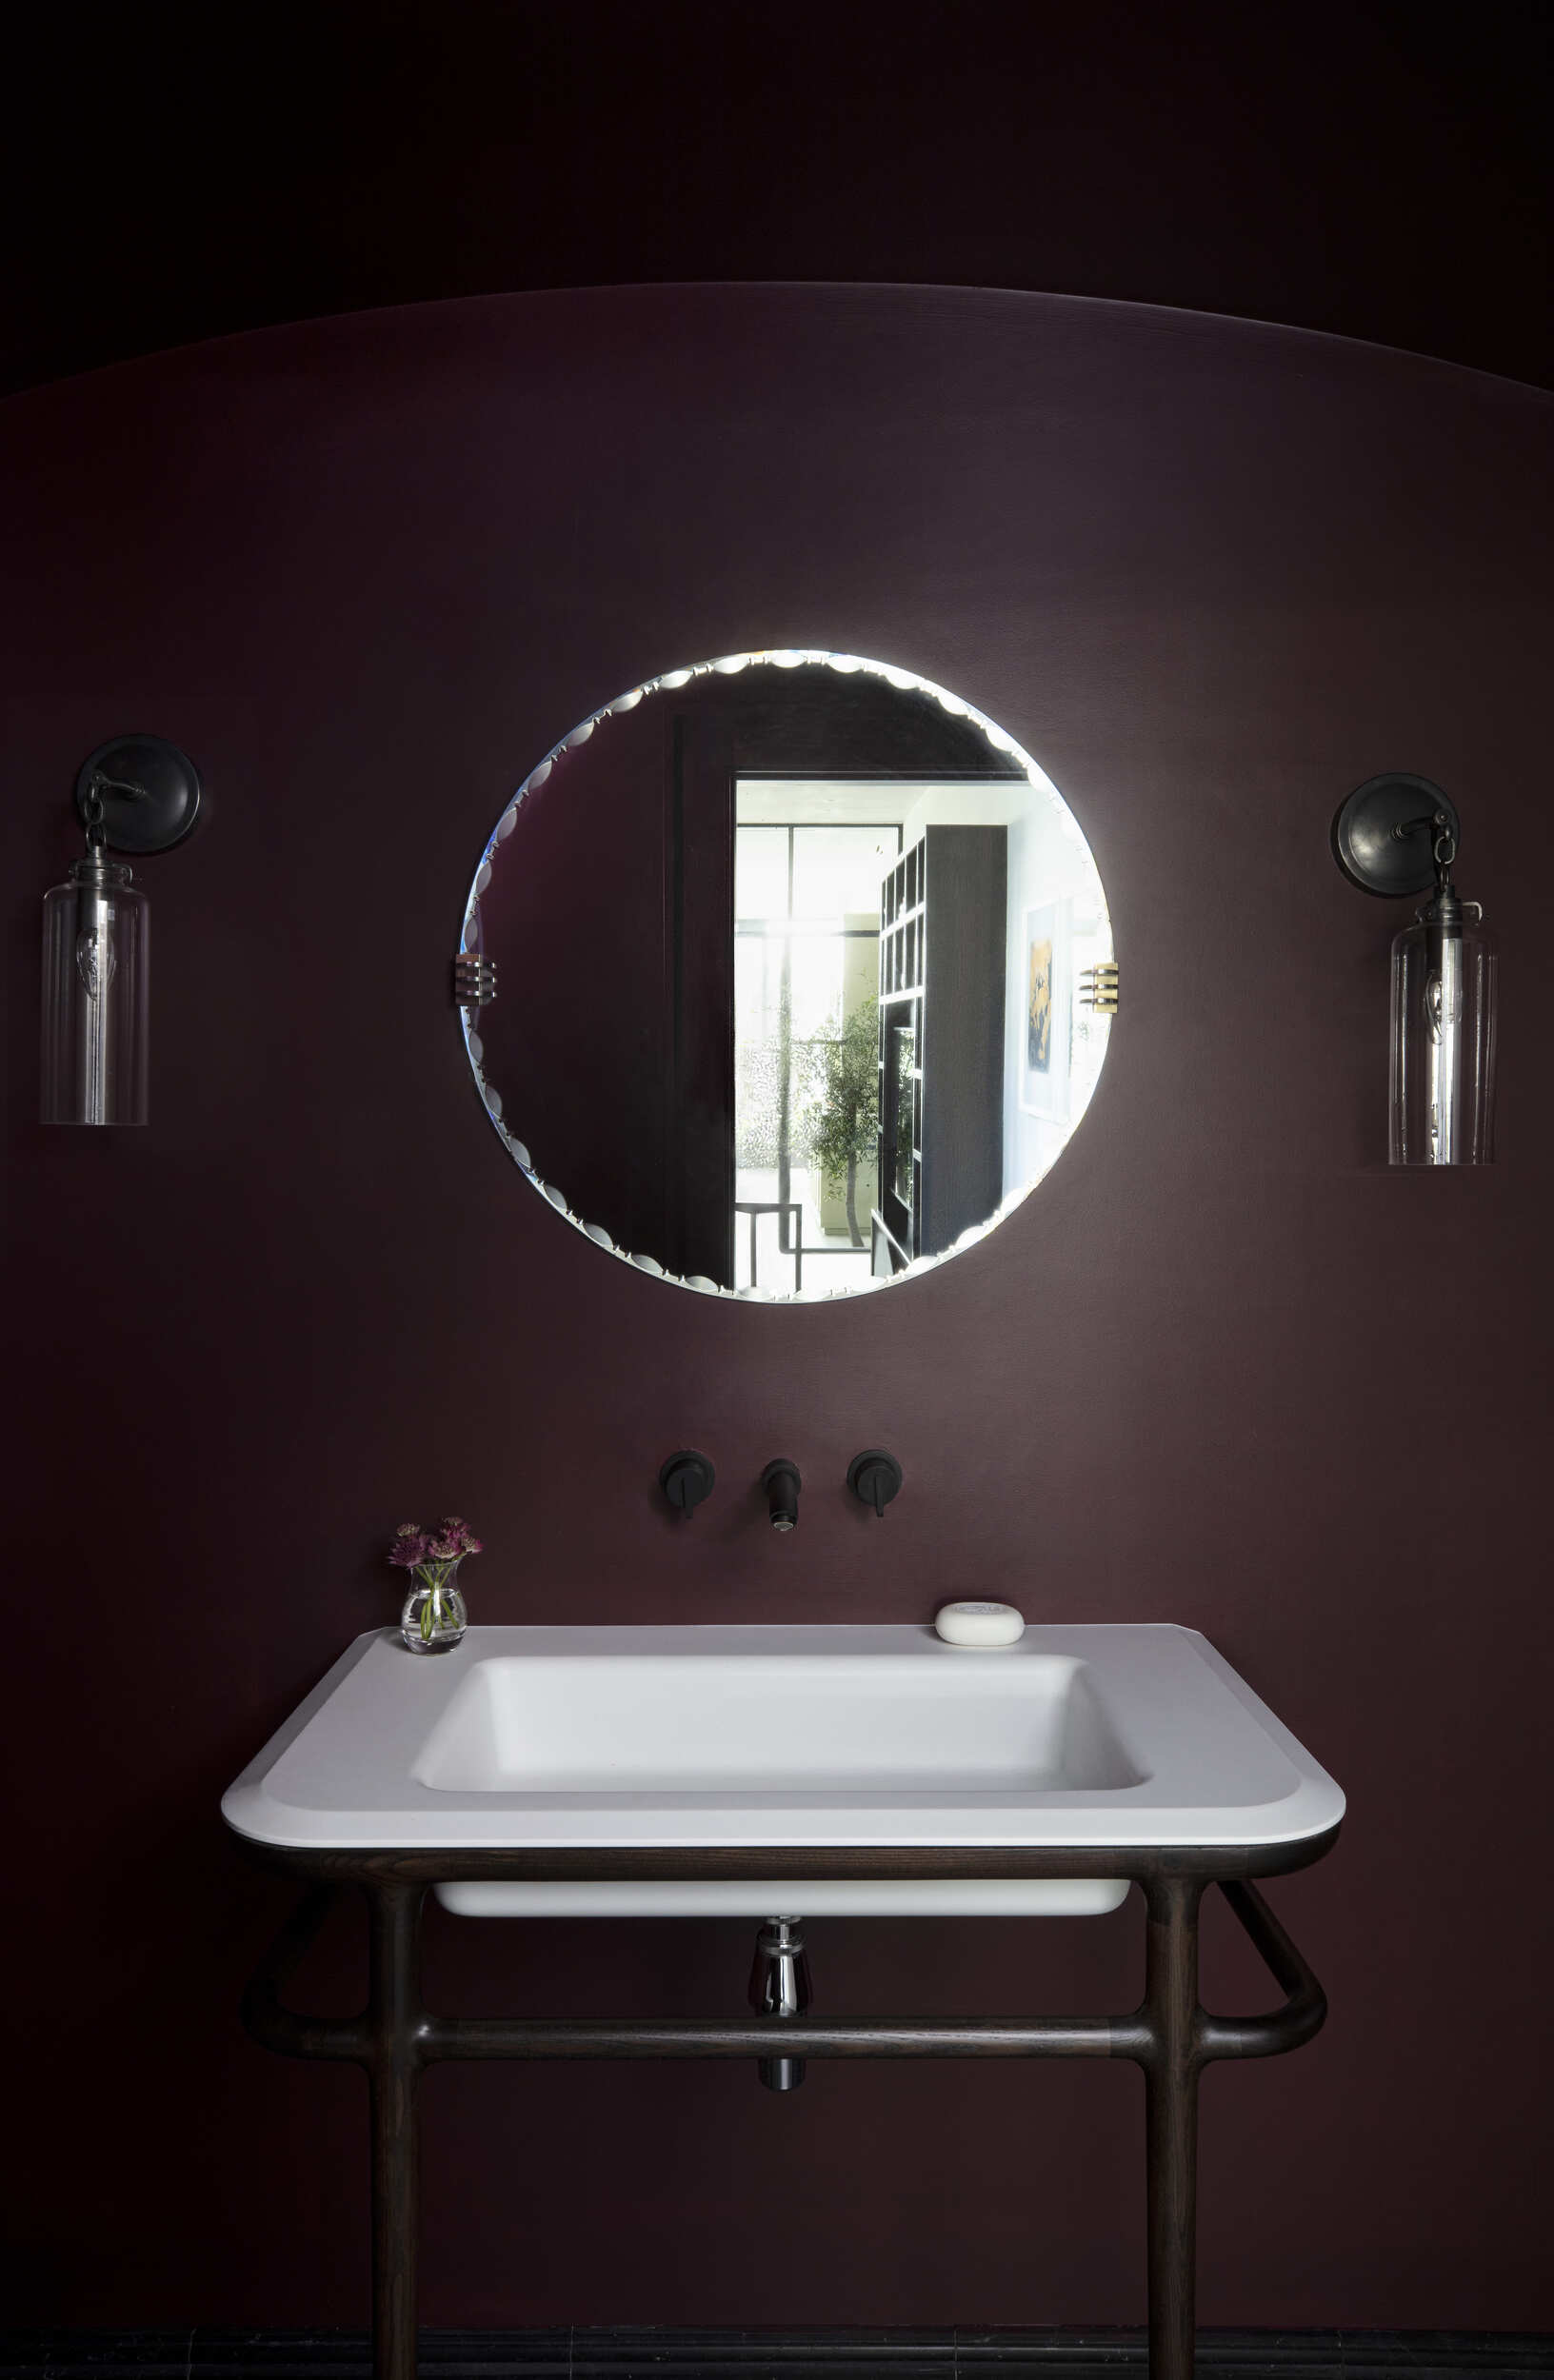 W/C sink with wall mounted mirror and two wall lights